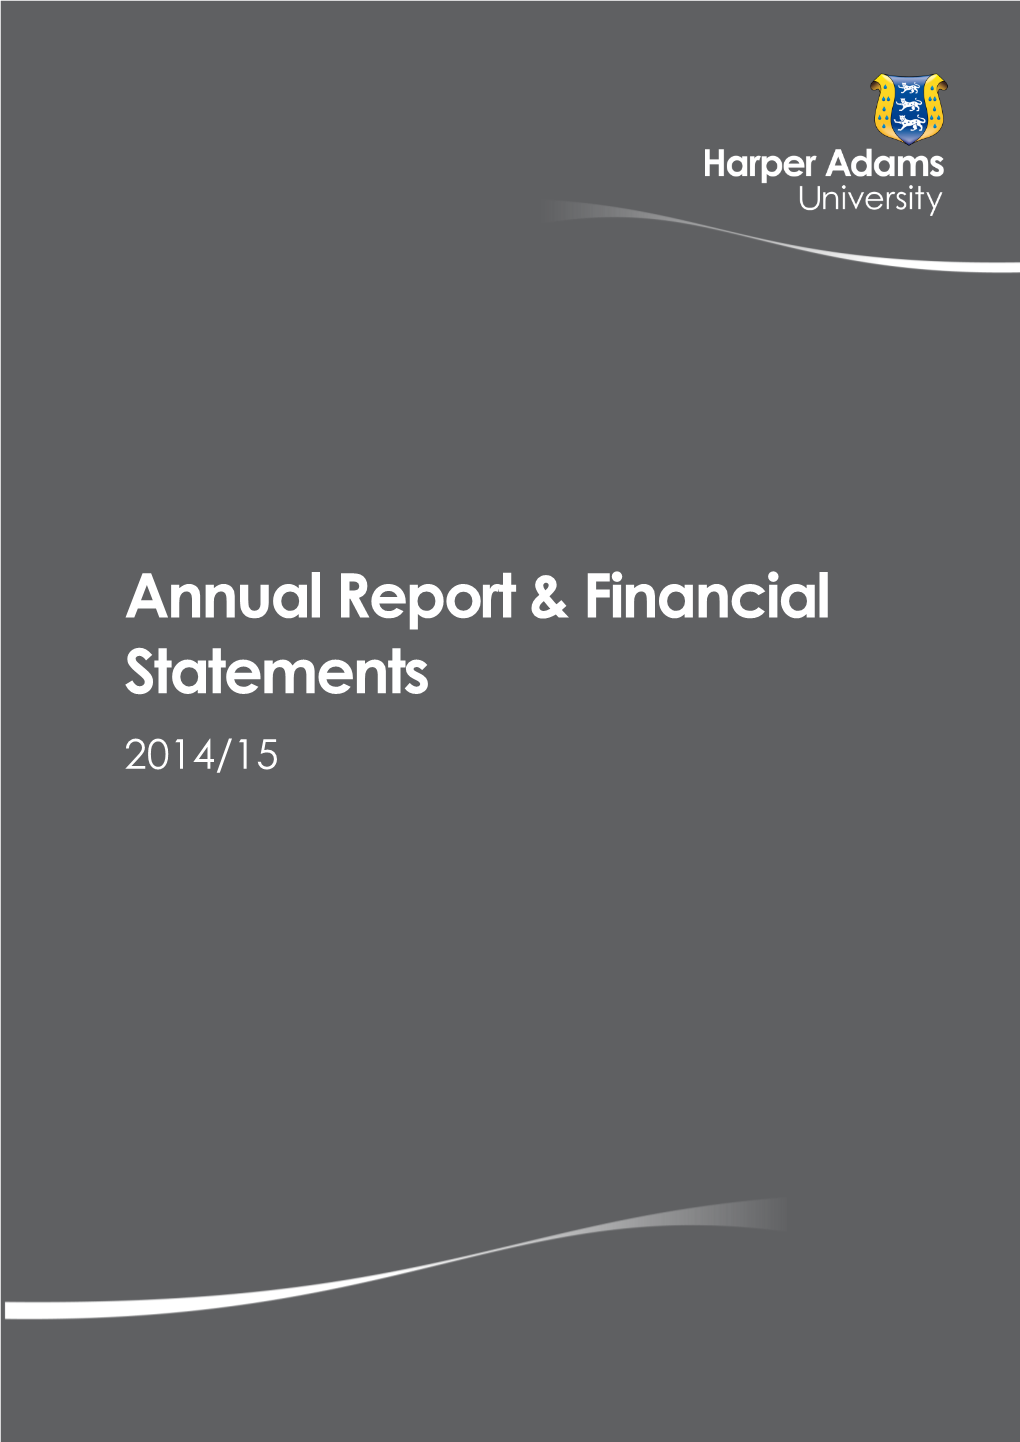 Annual Report and Financial Statements 2014/15